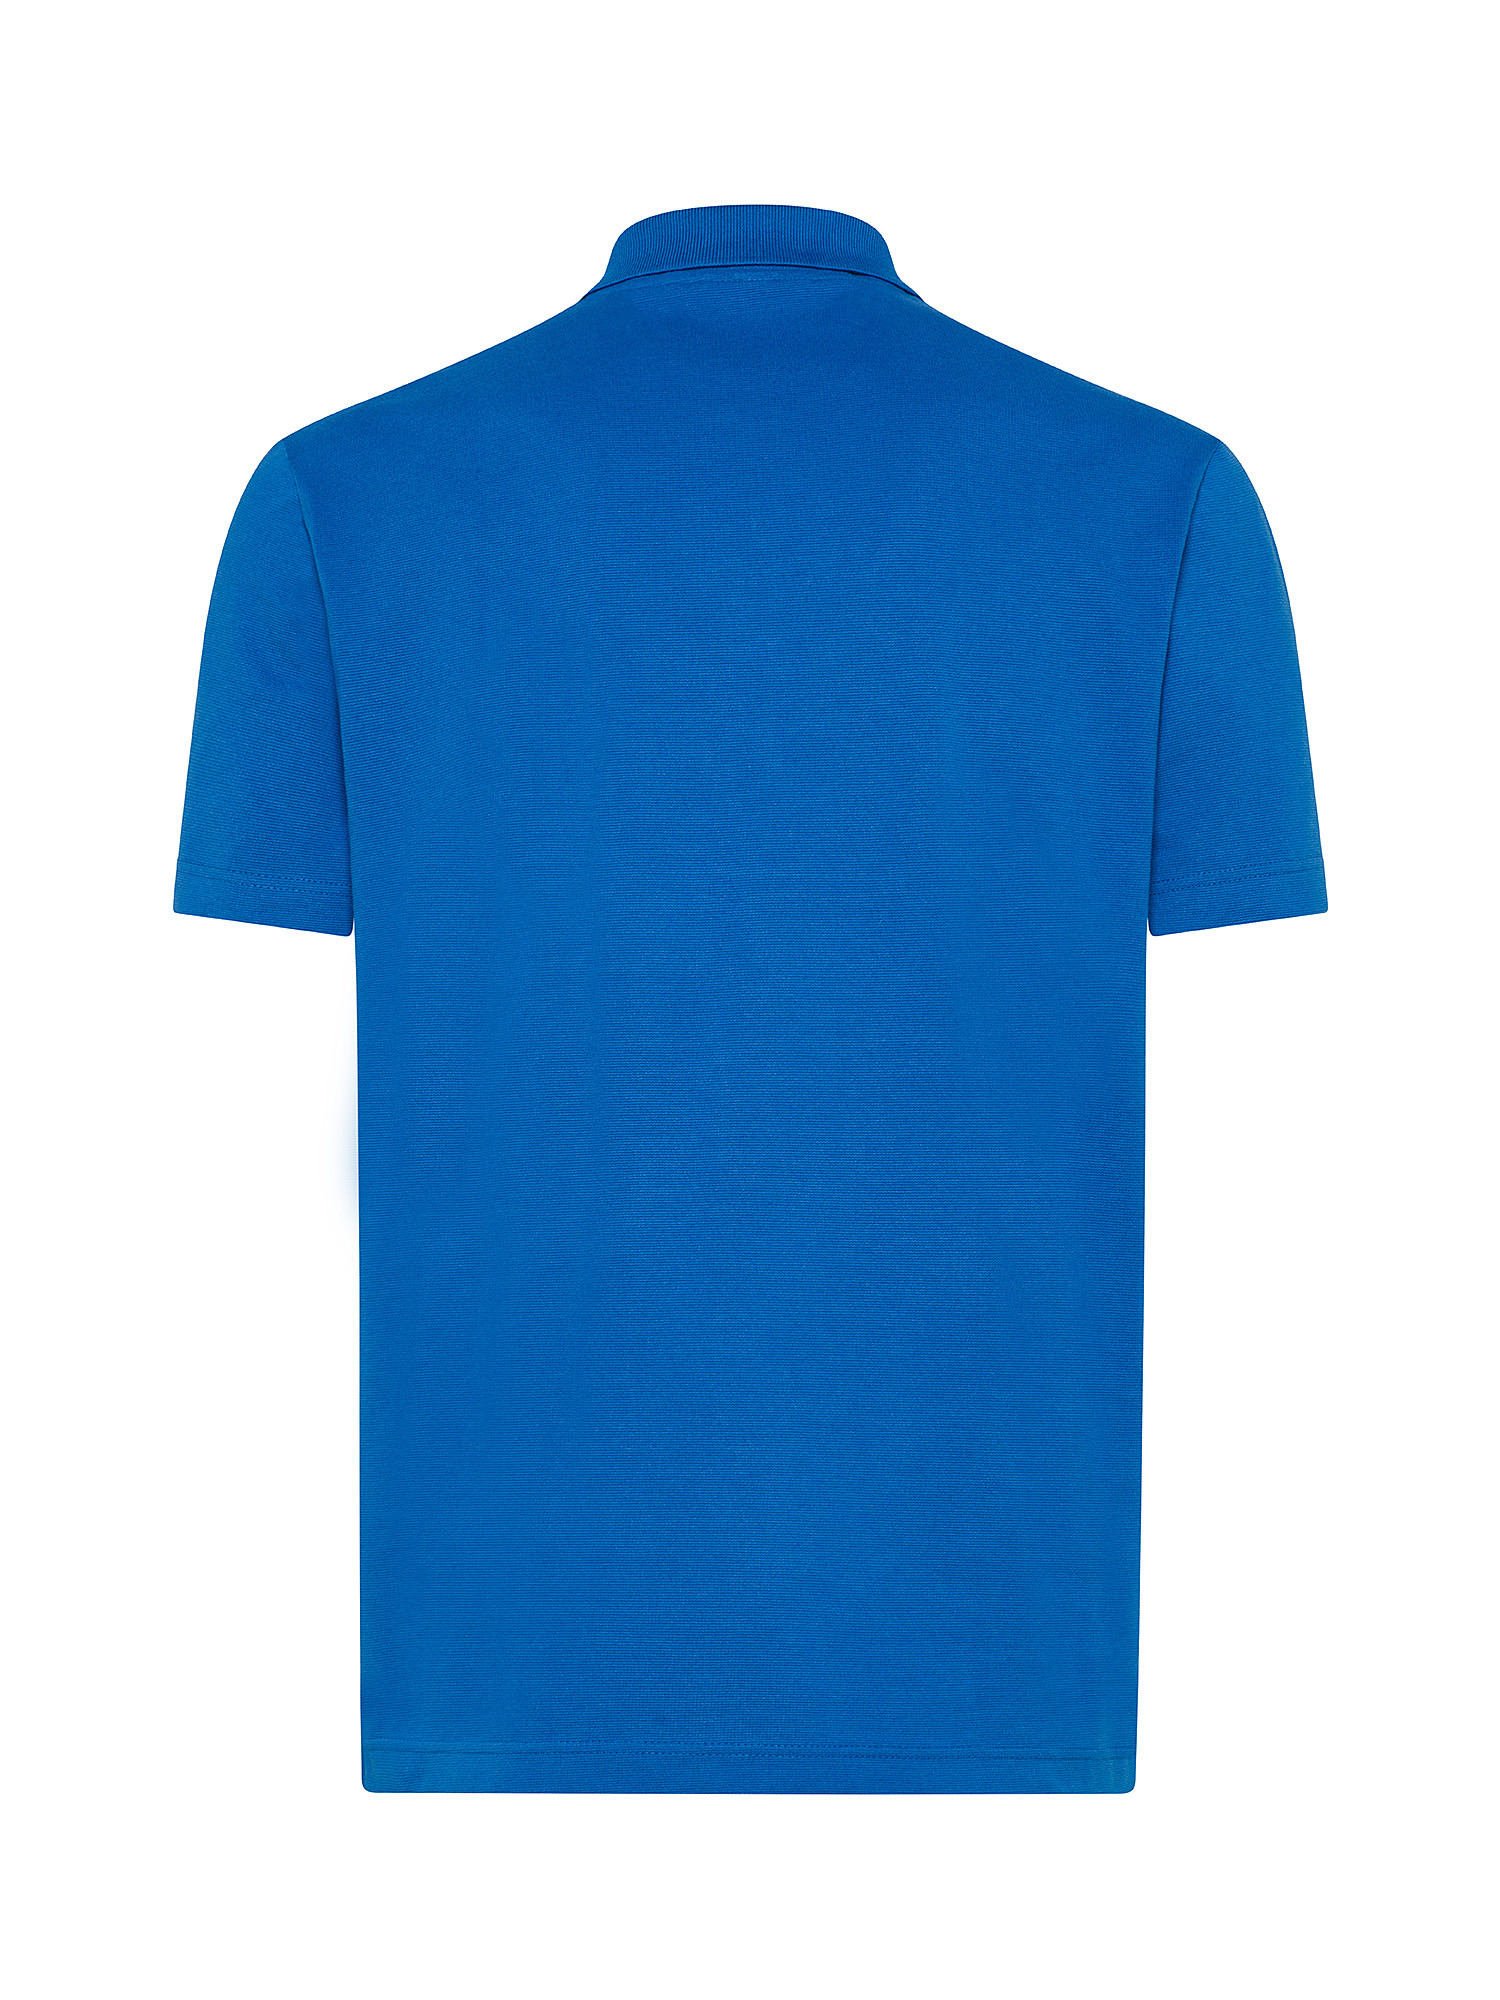 Lacoste - Polo stretch regular fit, Blu, large image number 1